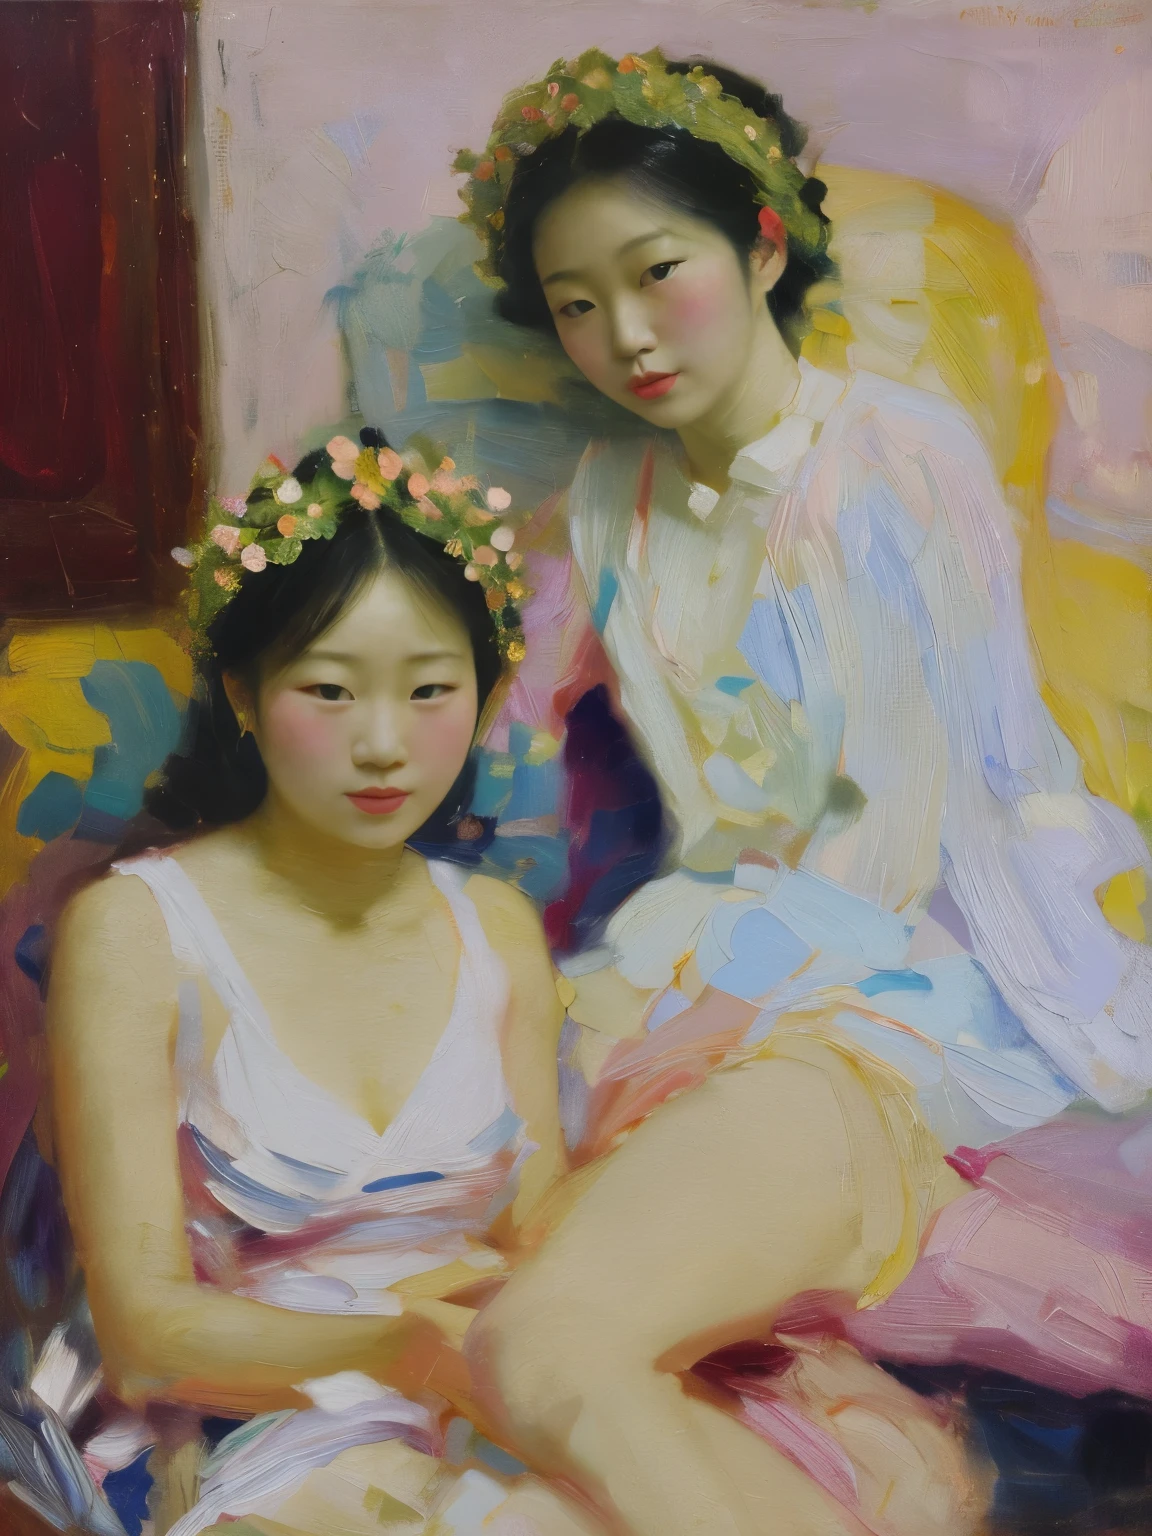 two women in lingersuits laying on a bed with flowers, inspired by Yanjun Cheng, yanjun chengt,  painting, inspired by Wang Duo, inspired by Chen Yifei, roberto ferri and ruan jia, girls resting, two models in the frame, two girls, inspired by Fenghua Zhong, inspired by Zhang Xuan, by Dai Xi a close up of a woman with a flower crown on her head, asian features, jinyoung shin, inspired by Yanjun Cheng, traditional art, korean artist, gorgeous chinese model, yanjun chengt, fanart, by Ni Tian, beautiful south korean woman, official artwork, by Wu Bin, wenfei ye, popular south korean makeup, a young asian woman absolutely abstract Retro vintage art print, sexy, glamorous pin-up girl wearing a sailors hat, bikini, A painting of a woman wife ((golden ratio}} laying on the sofa after a long night on the town, a painting, a Beautiful expressive painting, malcolm liepke painting, glossy painting, beautiful digital painting, digital art painting, Fine paintings, monochromatic. malcolm liepke oil painting, impressionist painting.Spread your legs apart, beautiful and delicate face, fair skin